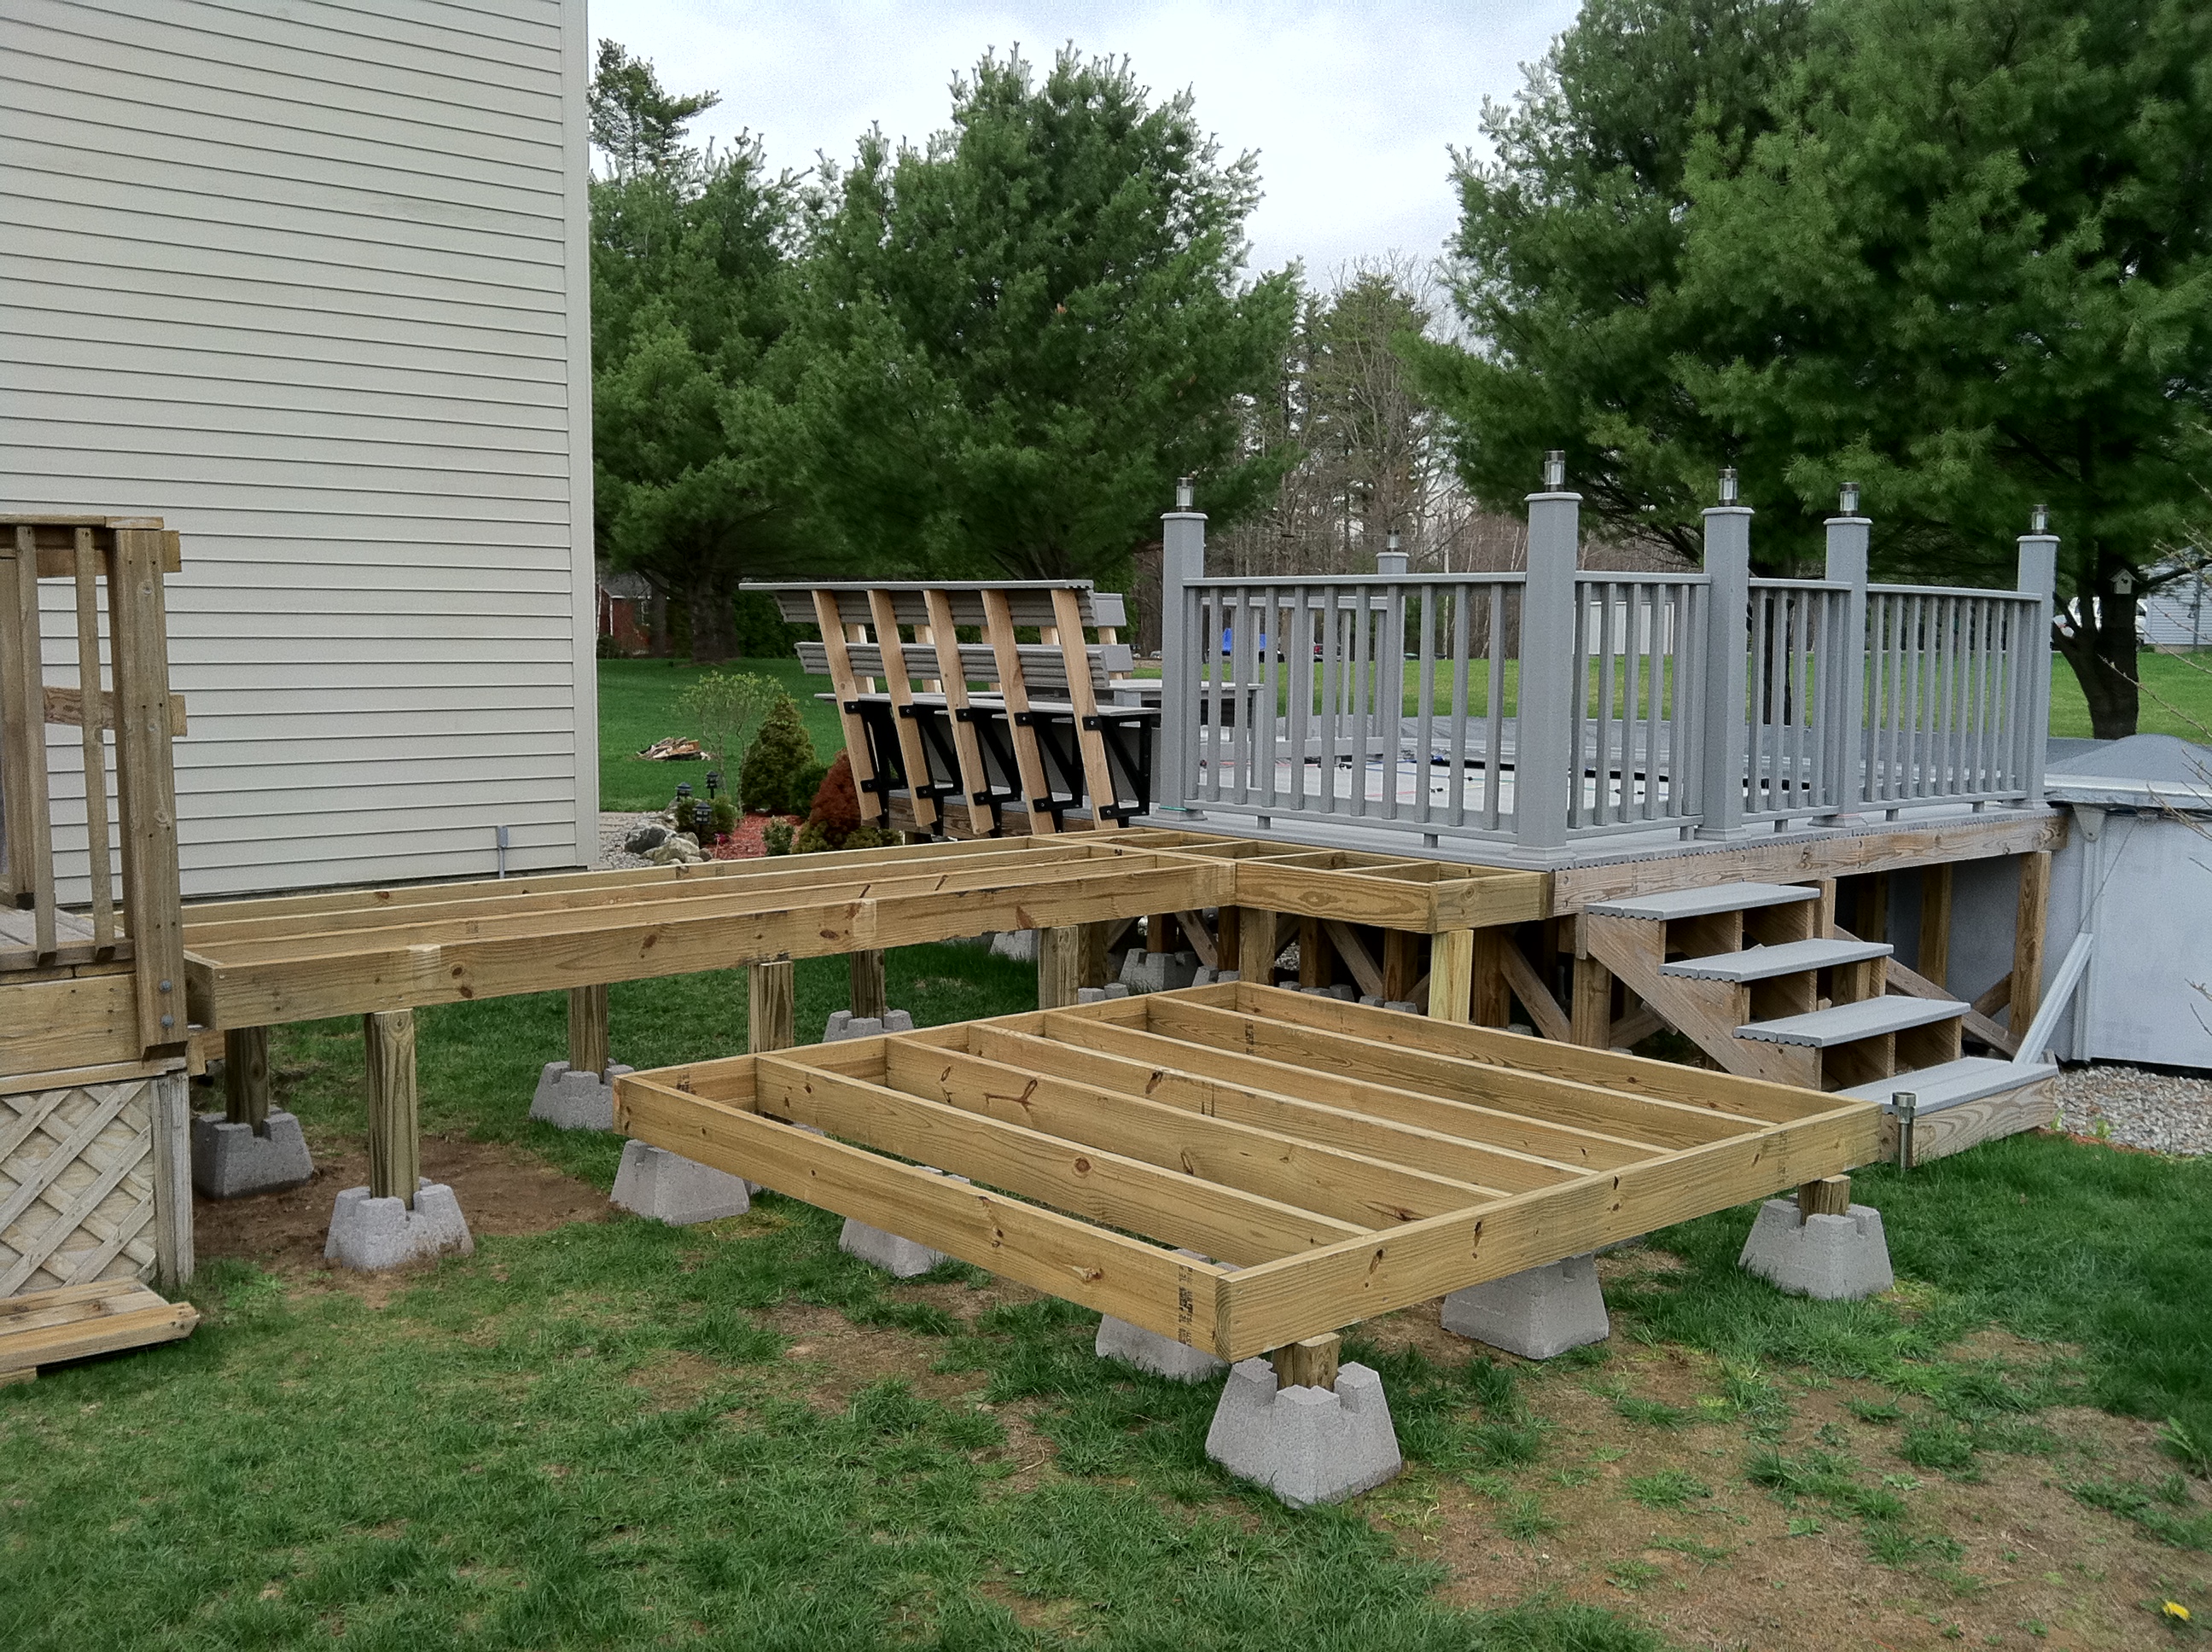 Framework for the hot tub and deck access Repair and 